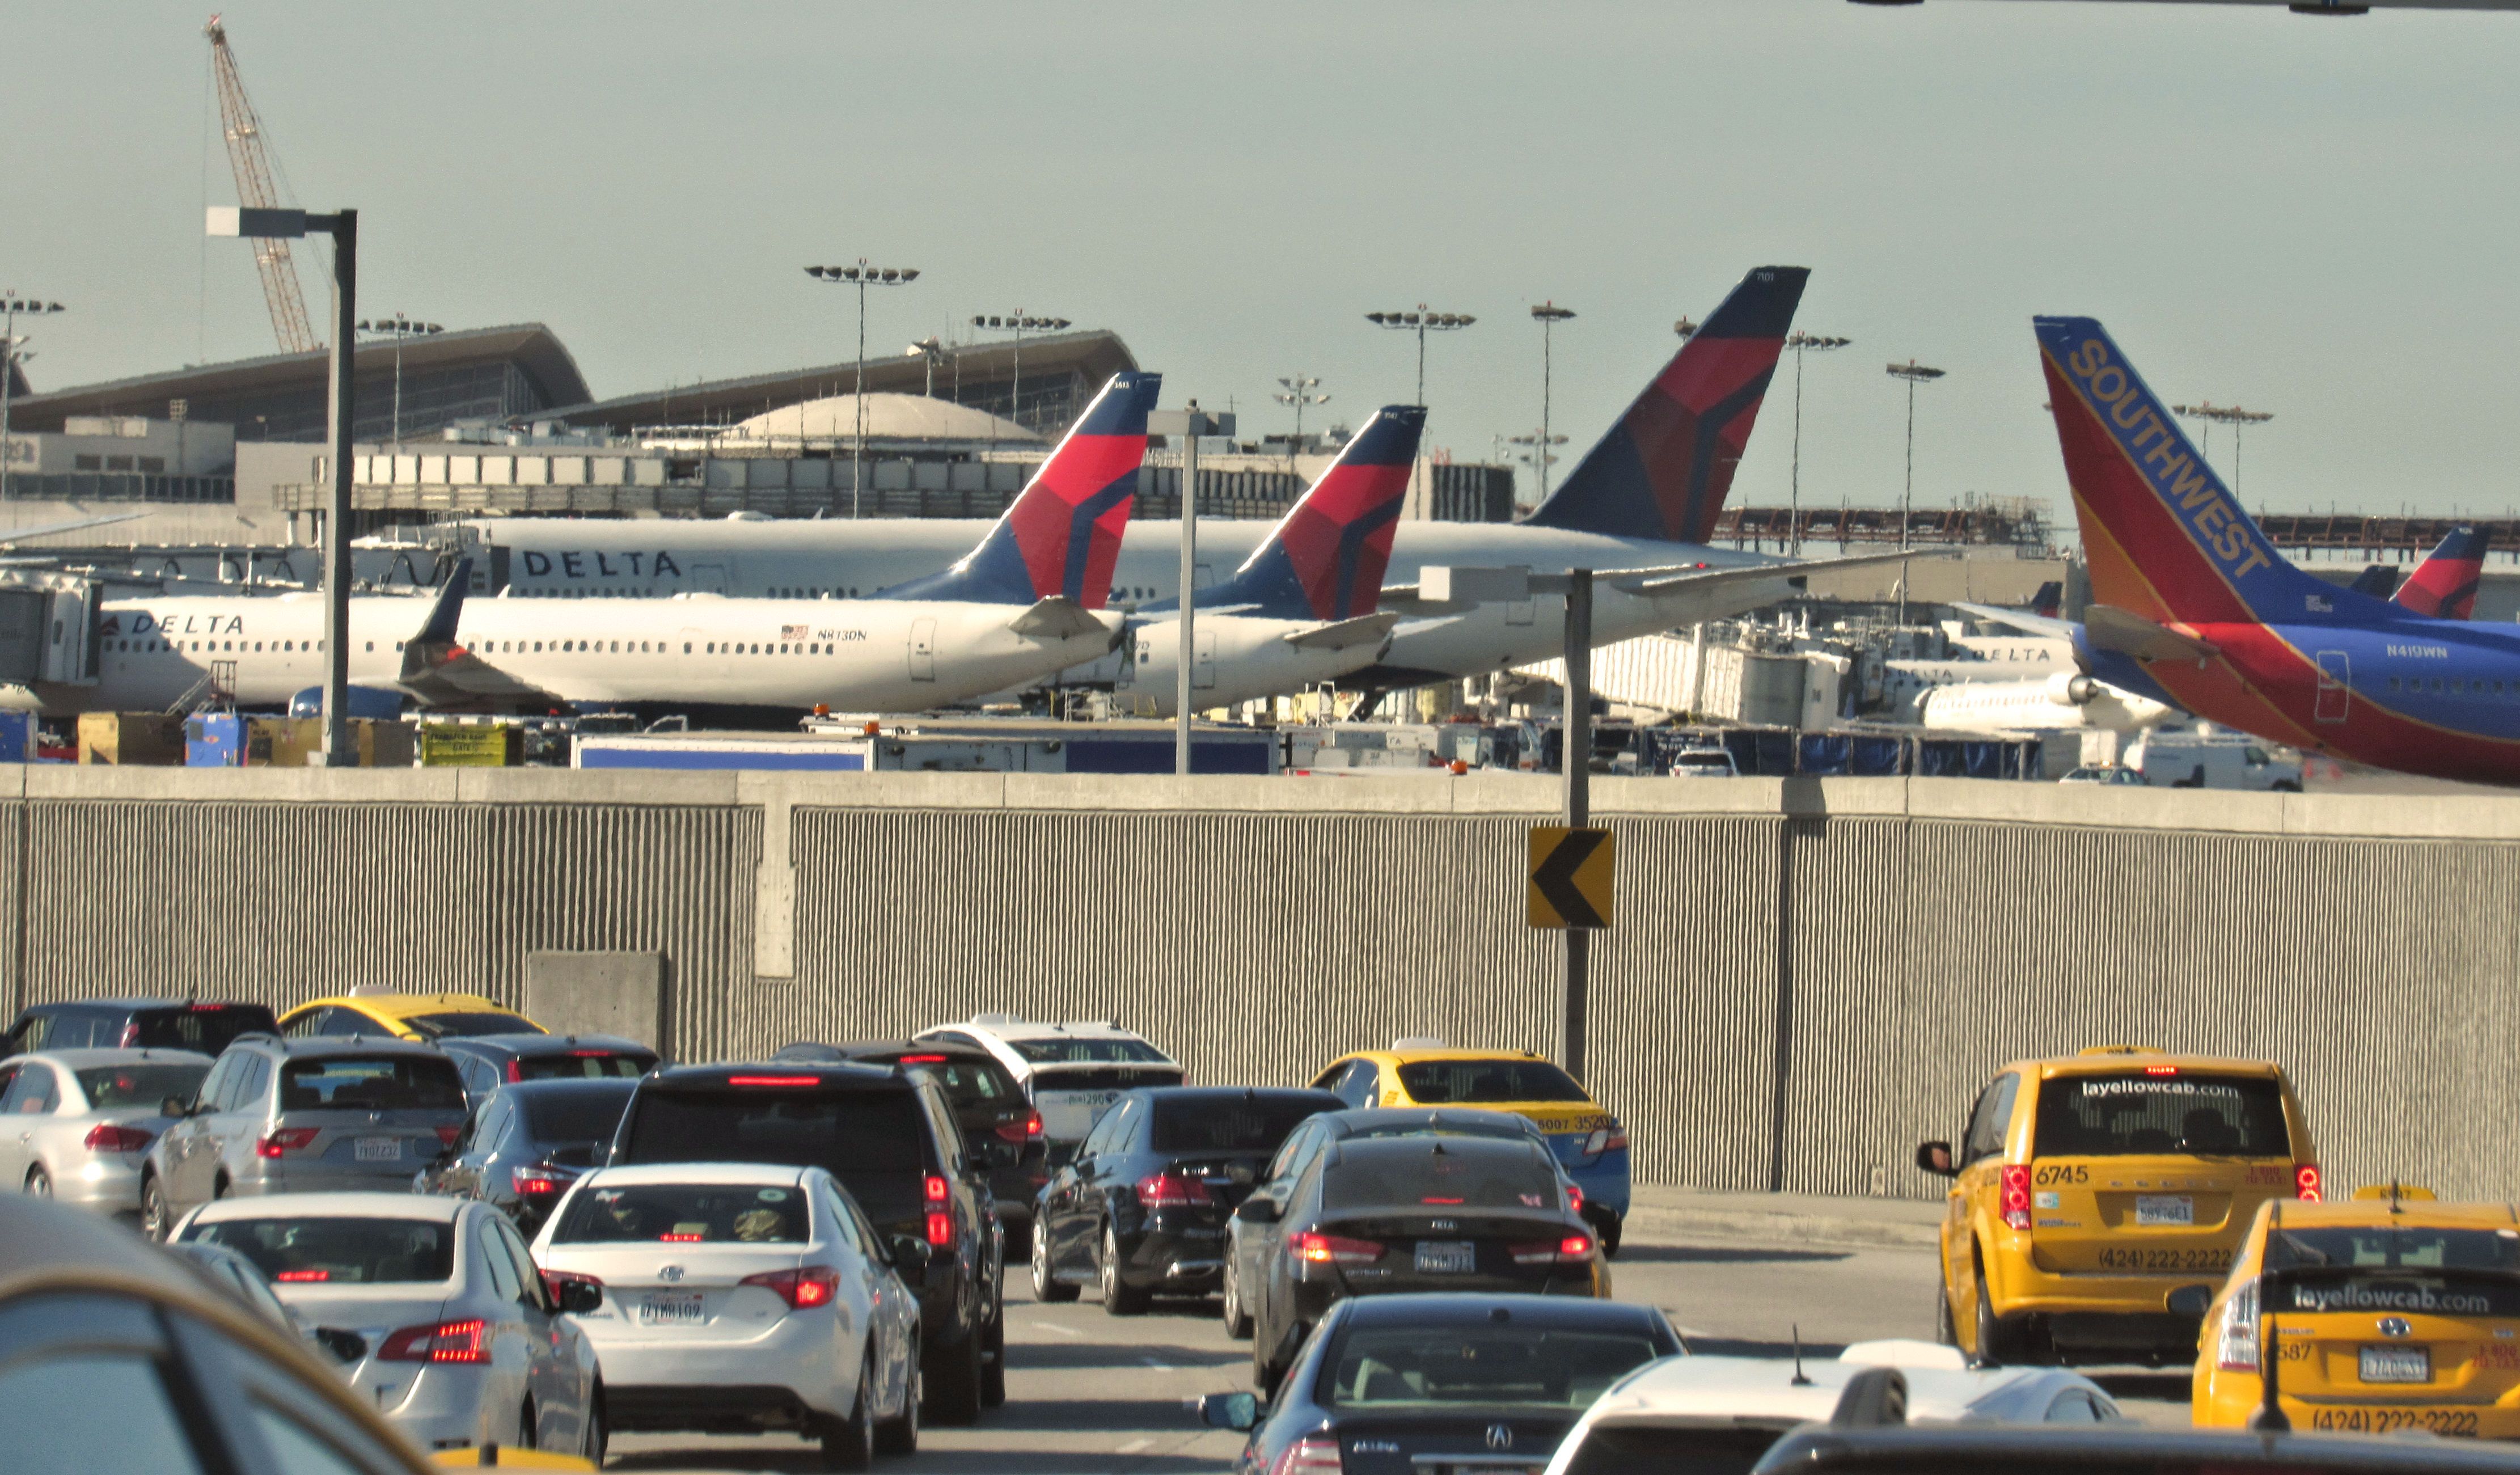 Road traffic files into LAX. Aircraft operated by Delta and Southwest are visible beyond the tarmac perimeter wall.